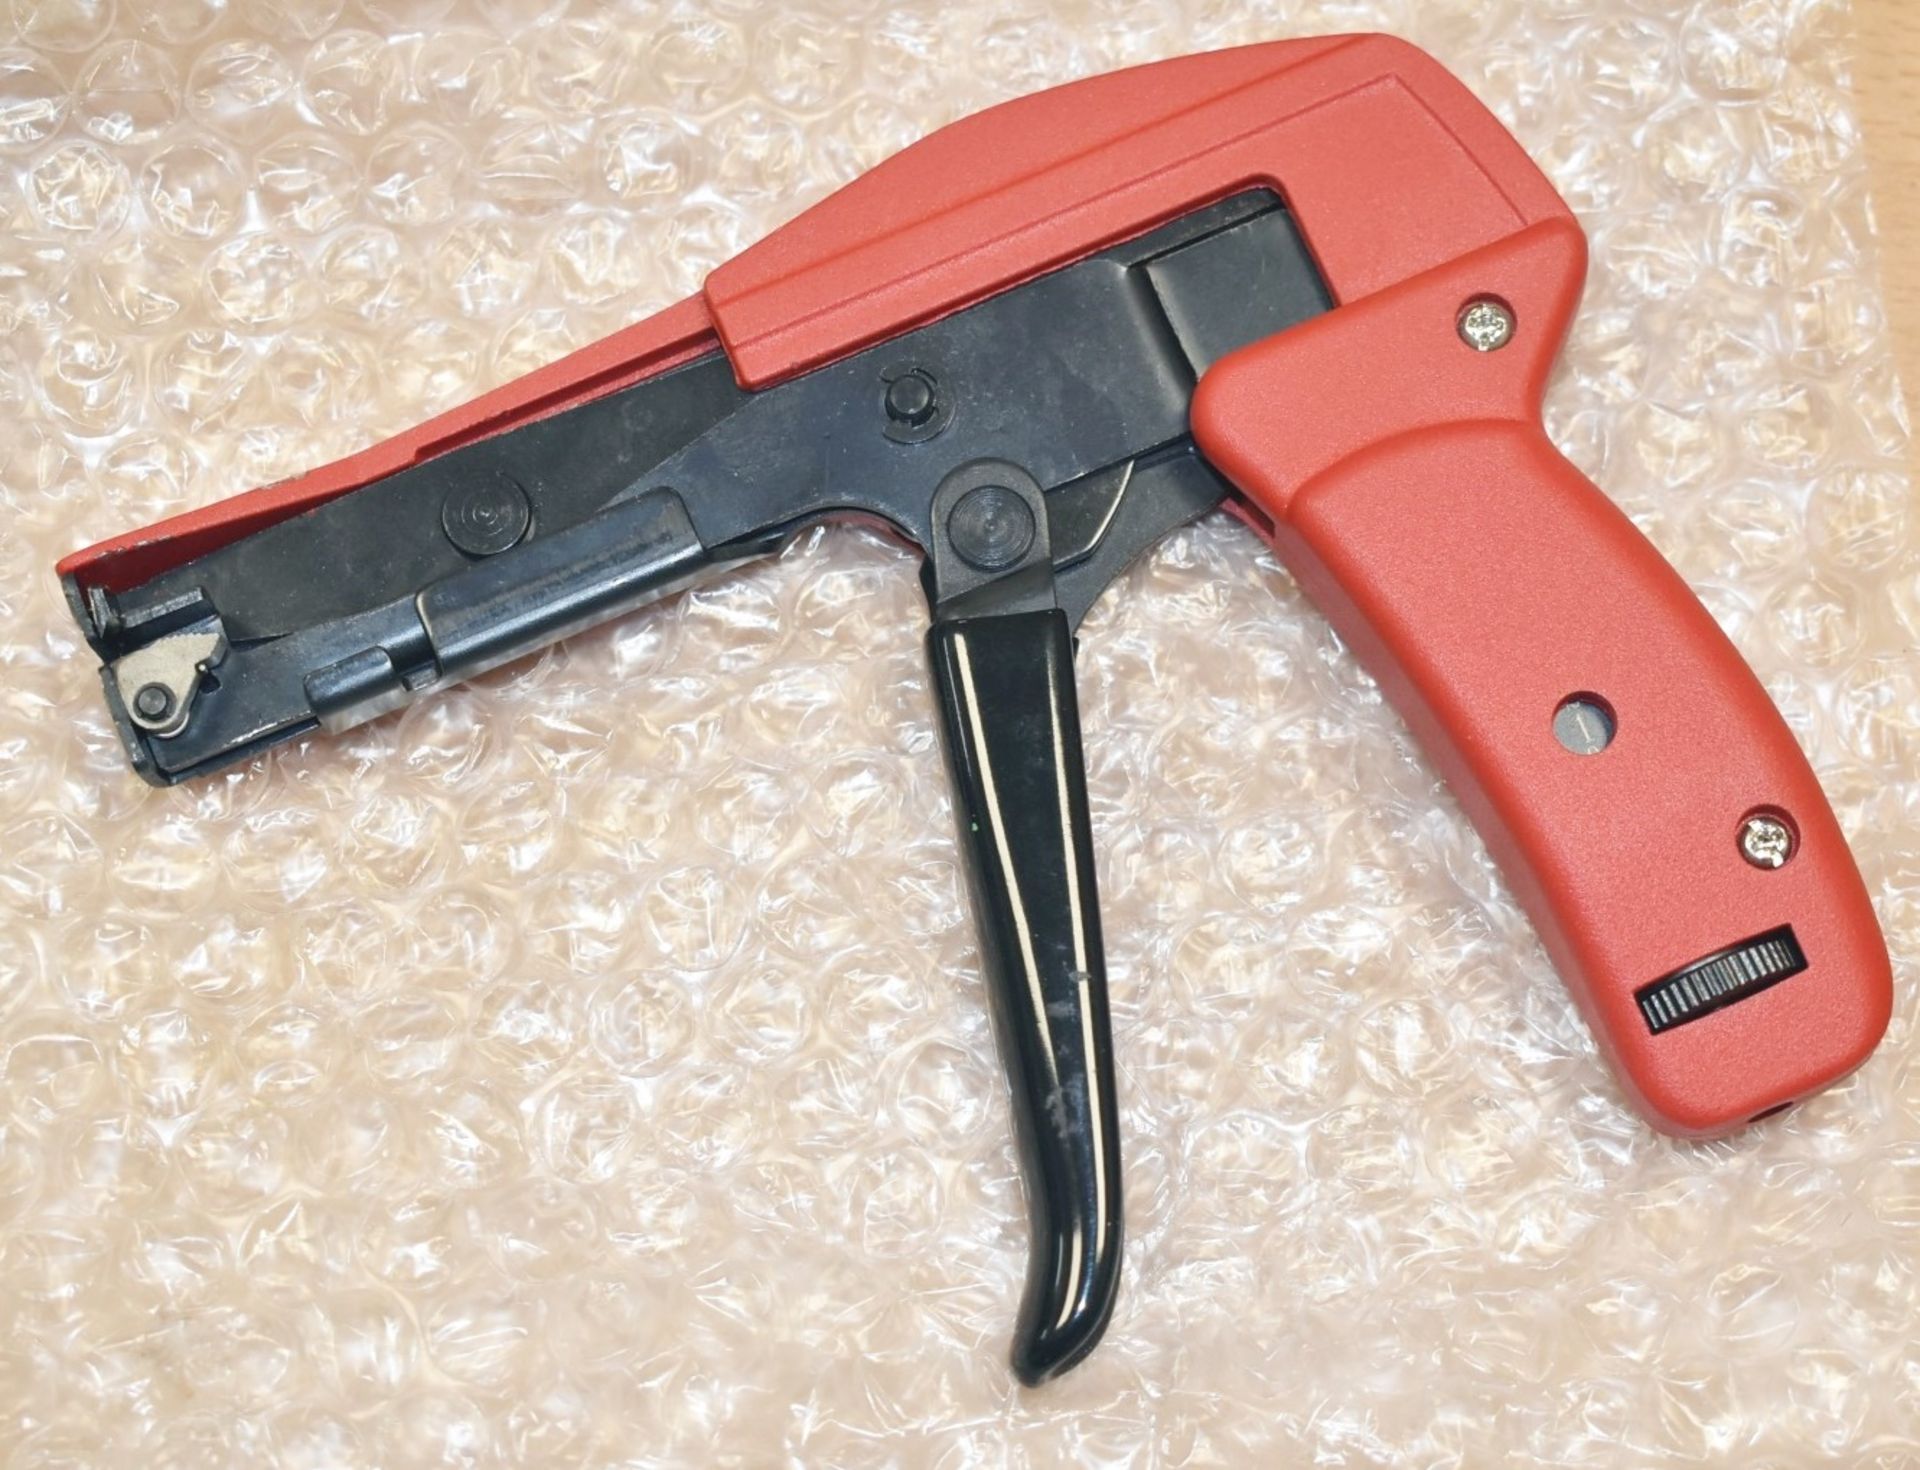 1 x Engex Cable Tie Tensioner and Cutter - Includes Original Box